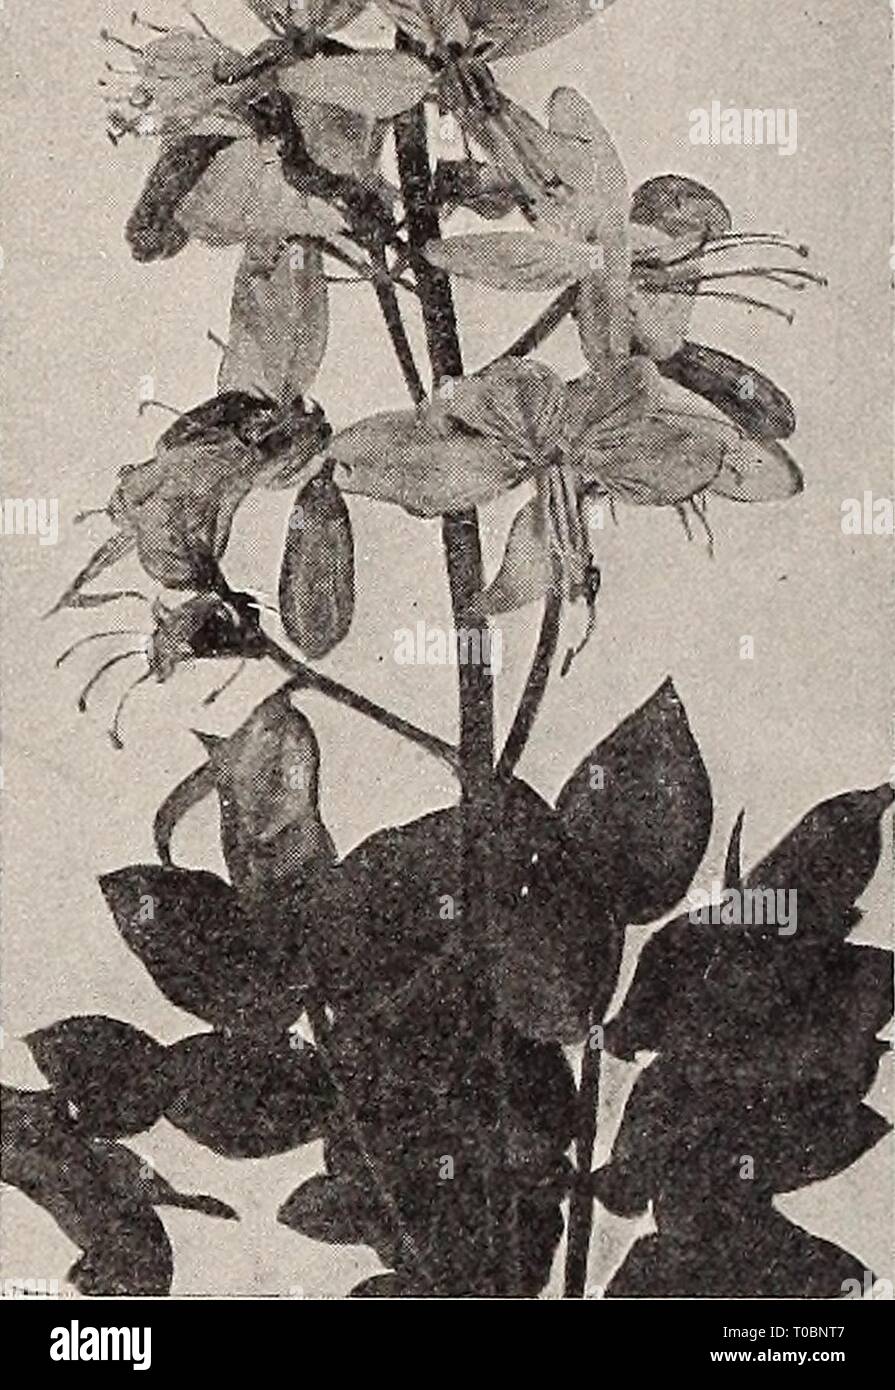 Dreer's garden book 1932 (1932) Dreer's garden book 1932 dreersgardenbook1932henr Year: 1932  DlCTAMNUS Epimedium (Barren-wort, Bishop's Hat) An attractive plant growing 8 to 10 inches high with leathery bronzy foliage and panicles of interesting flowers in April and May. Suitable for a shady spot on the rockery or for the edge of the border. Lilacea. Soft lilac. Niveum. Snow white. Pinnatum Elegans. Yellow. Rubrum. Deep red. 50 cts. each; $5.00 per doz.; $40.00 per 100. Erigeron (Fleabane) Coulteri. Grows about 15 inches high and during July bears attractive single mauve- colored Aster-like f Stock Photo